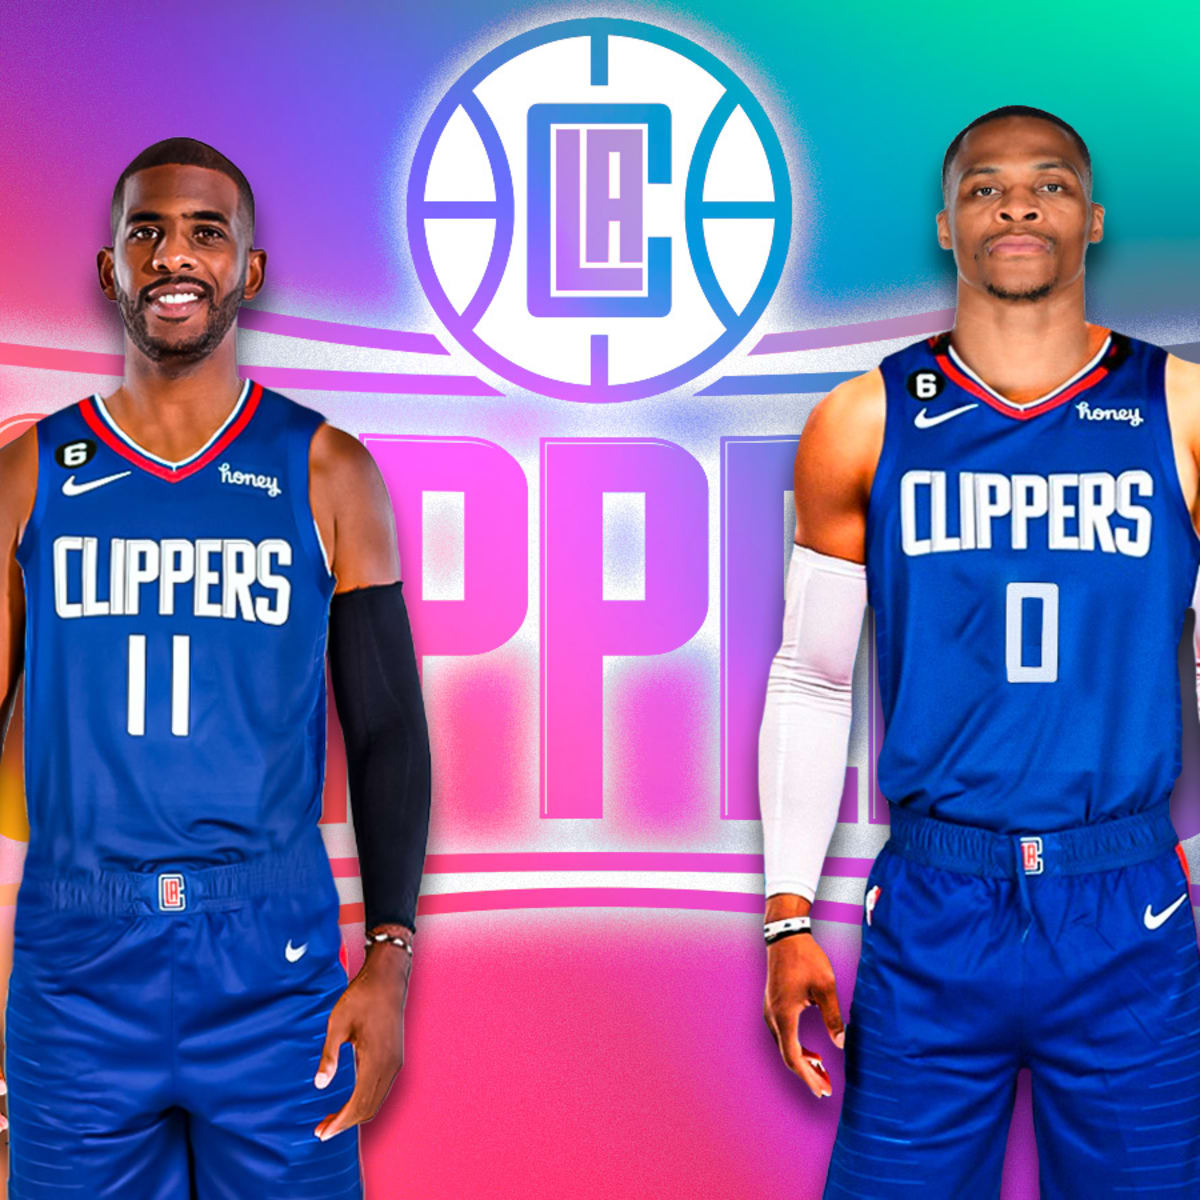 NBA on TNT - Russell Westbrook plans to sign with the Clippers